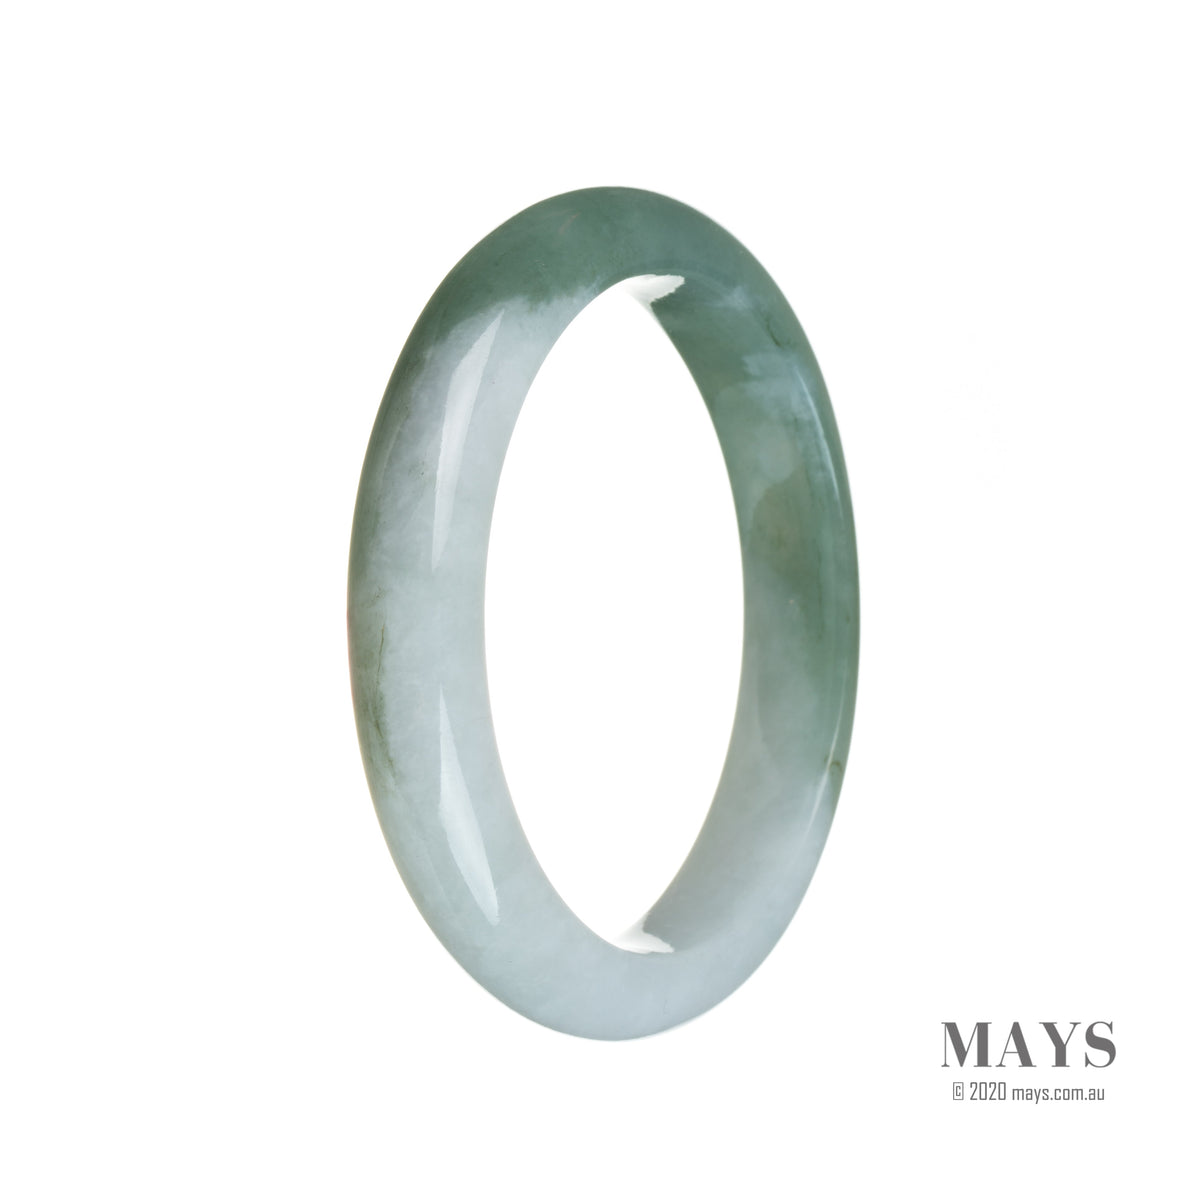 A bangle bracelet made of real untreated lavender with a green jade center, shaped like a half moon.